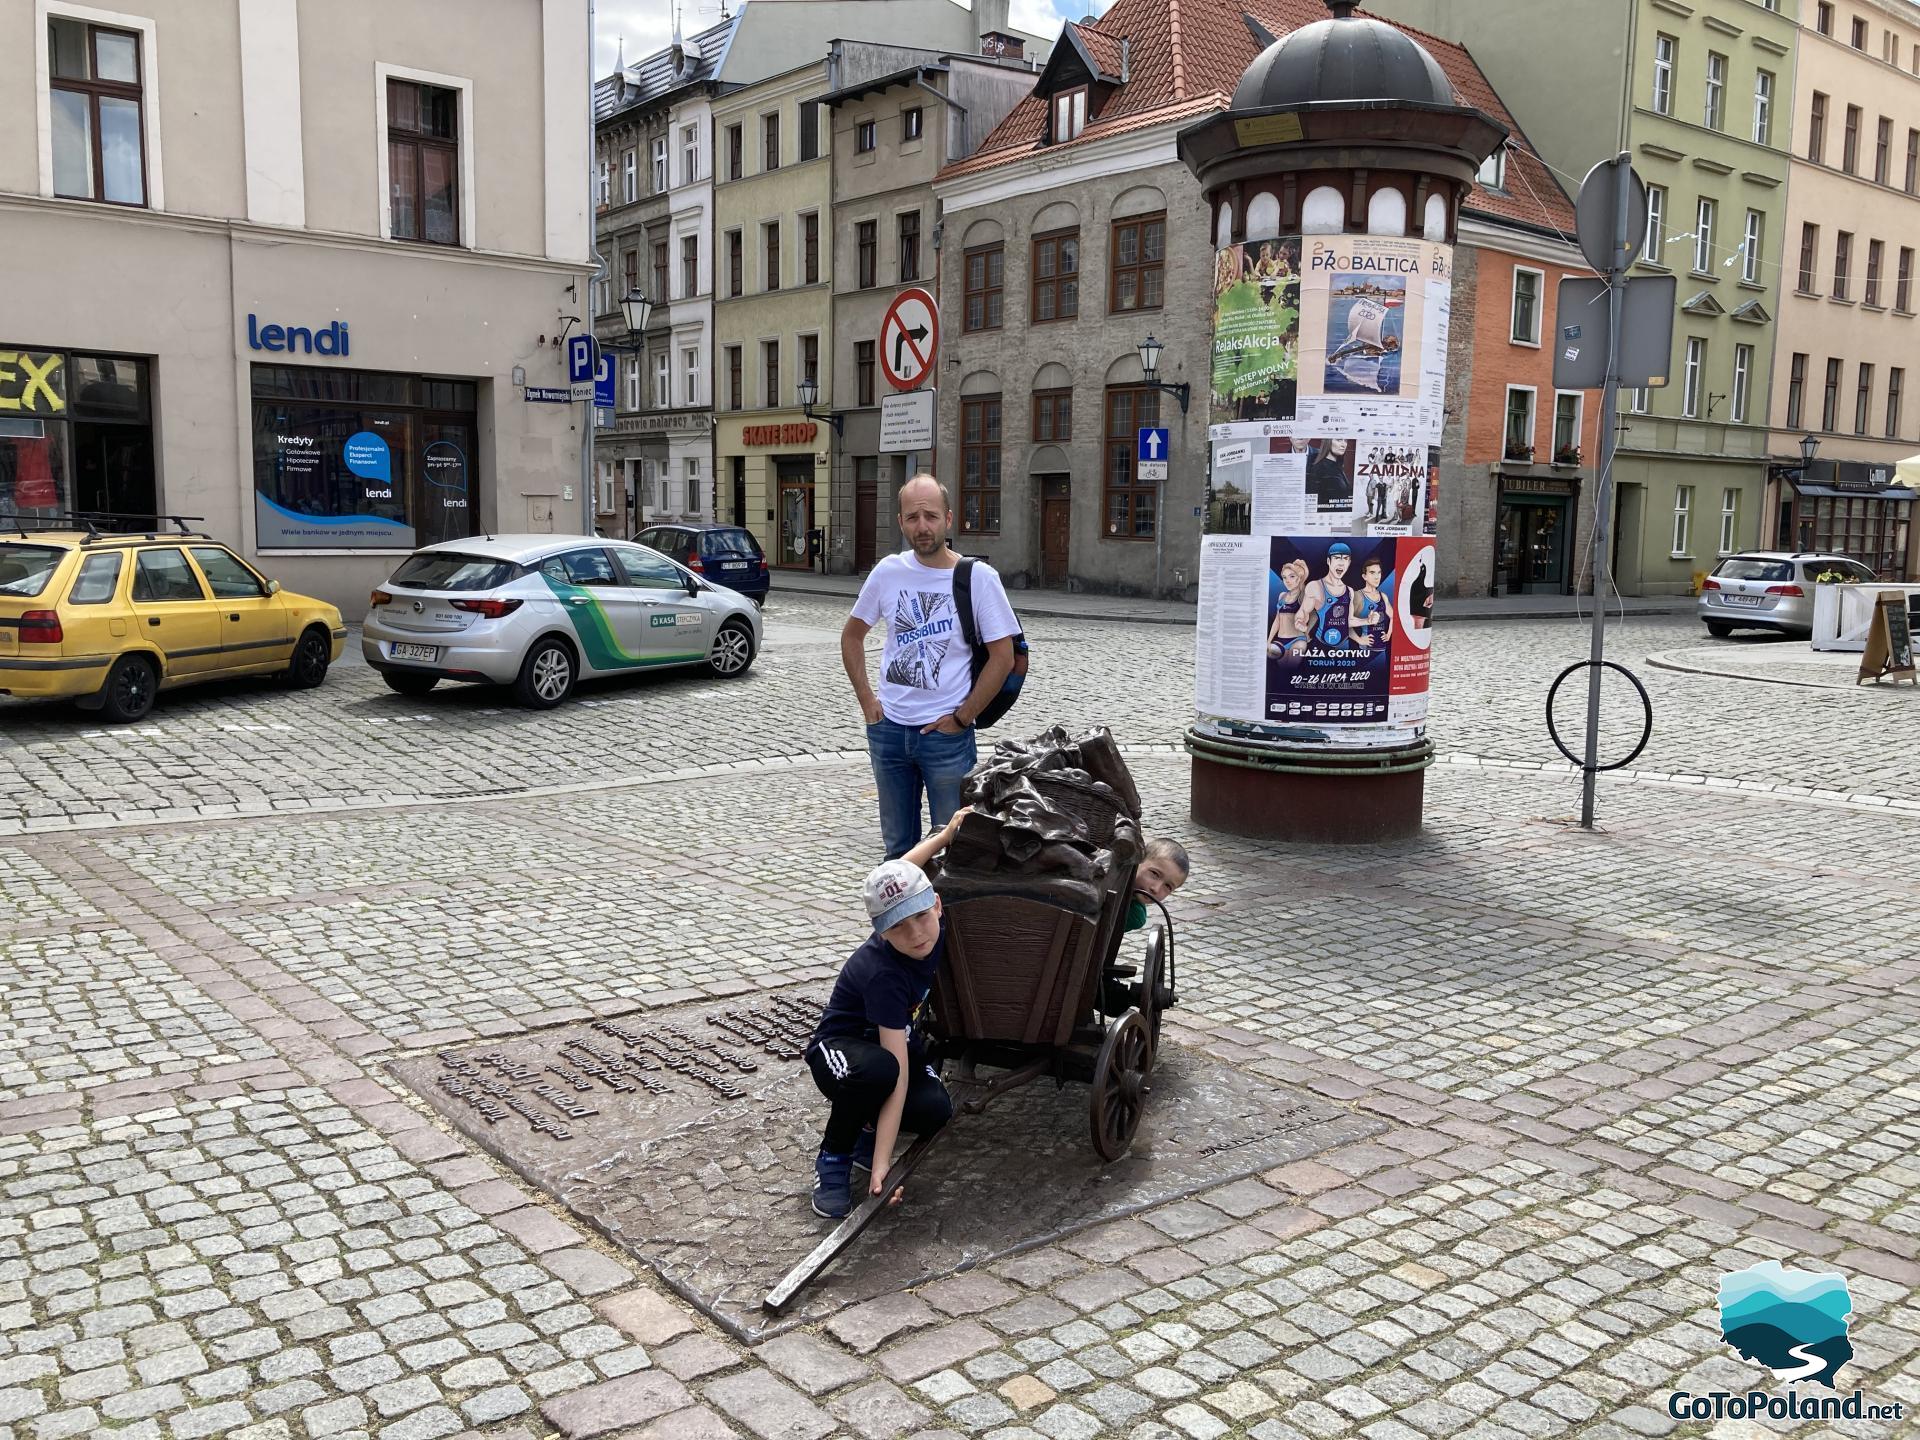 a man with two children are next to the wheelbarrow statue, there is a commemorative plaque from the movie The Law and the Fist, which was shot in this place